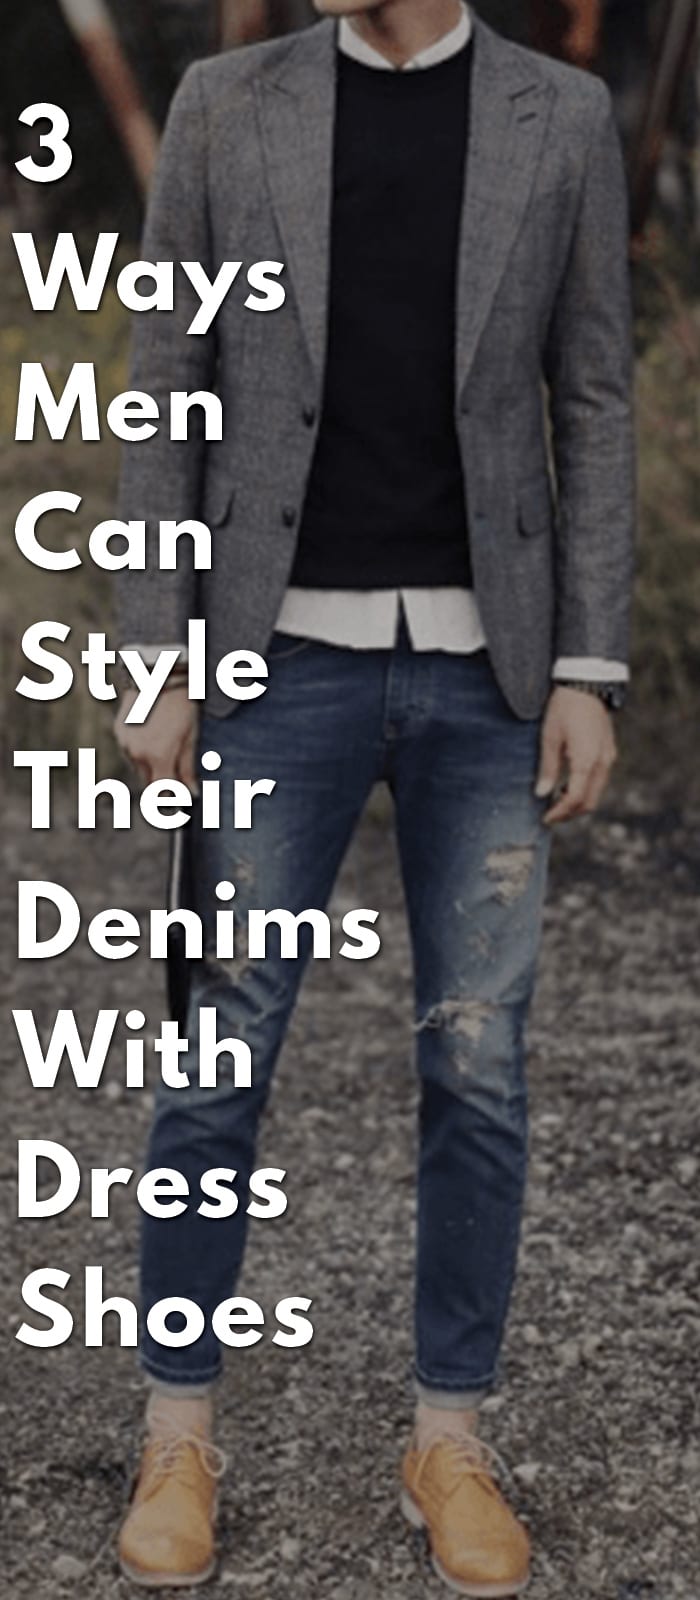 3-Ways-Men-Can-Style-Their-Denims-With-Dress-Shoes